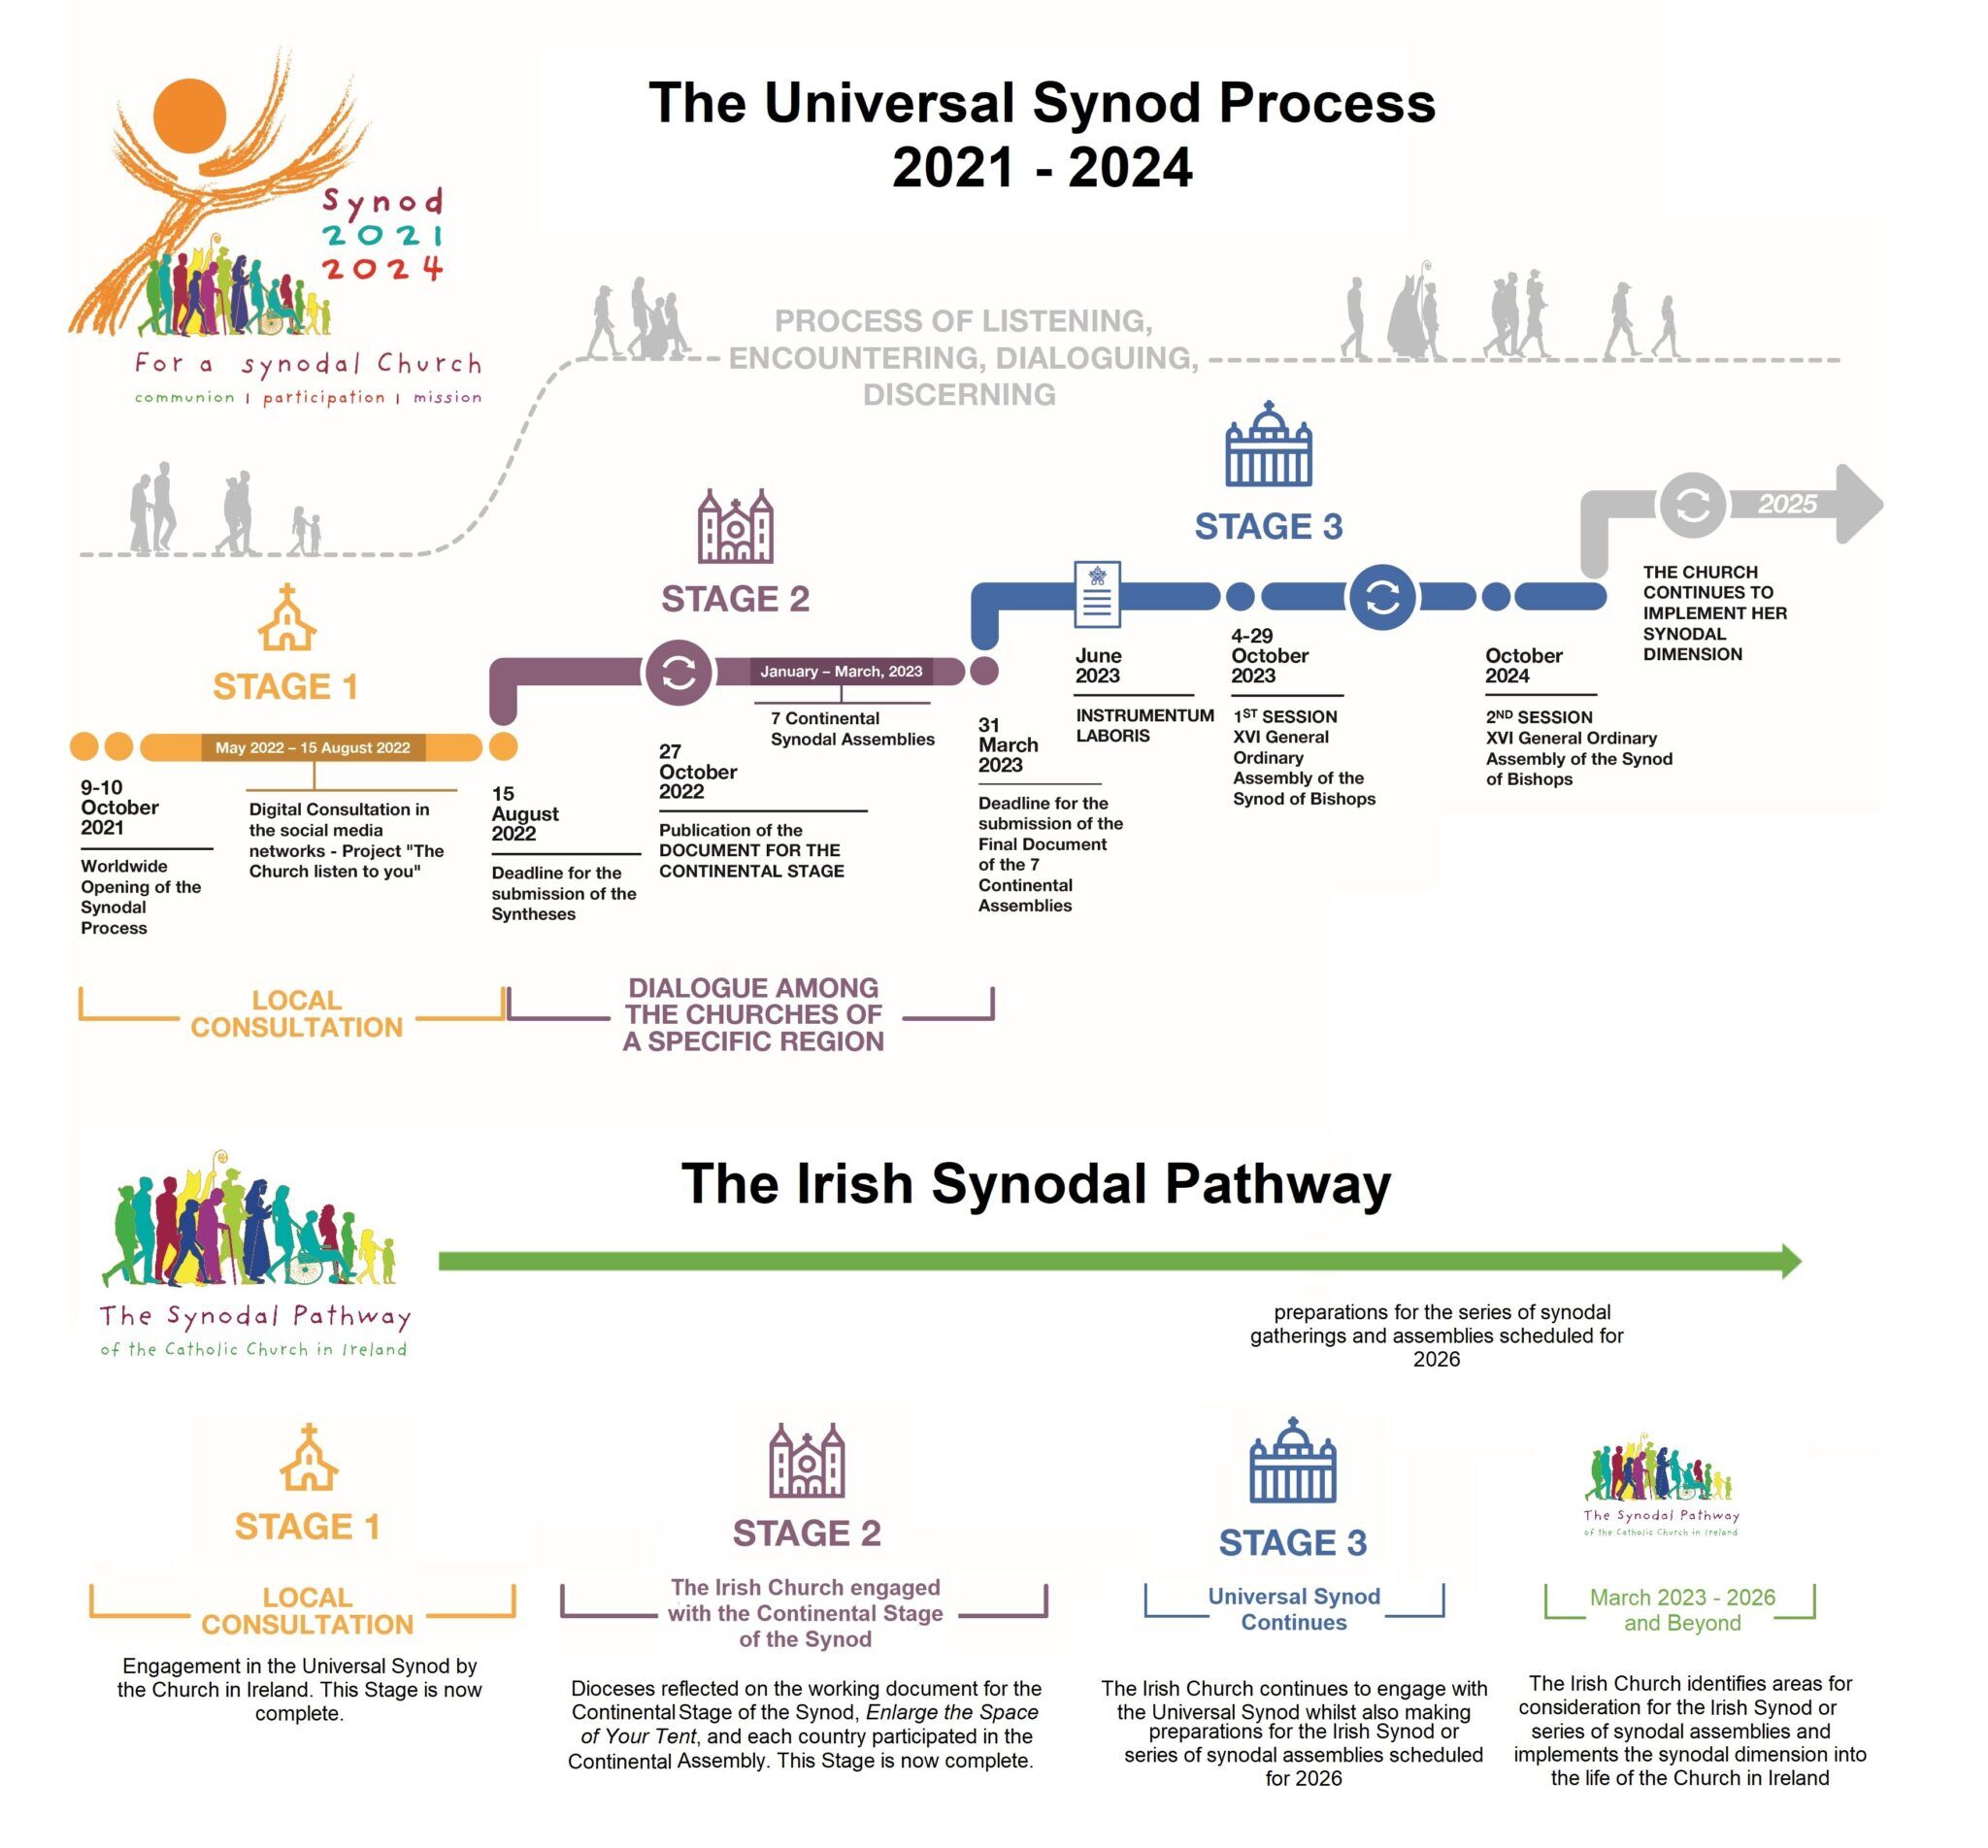 The Synod Process